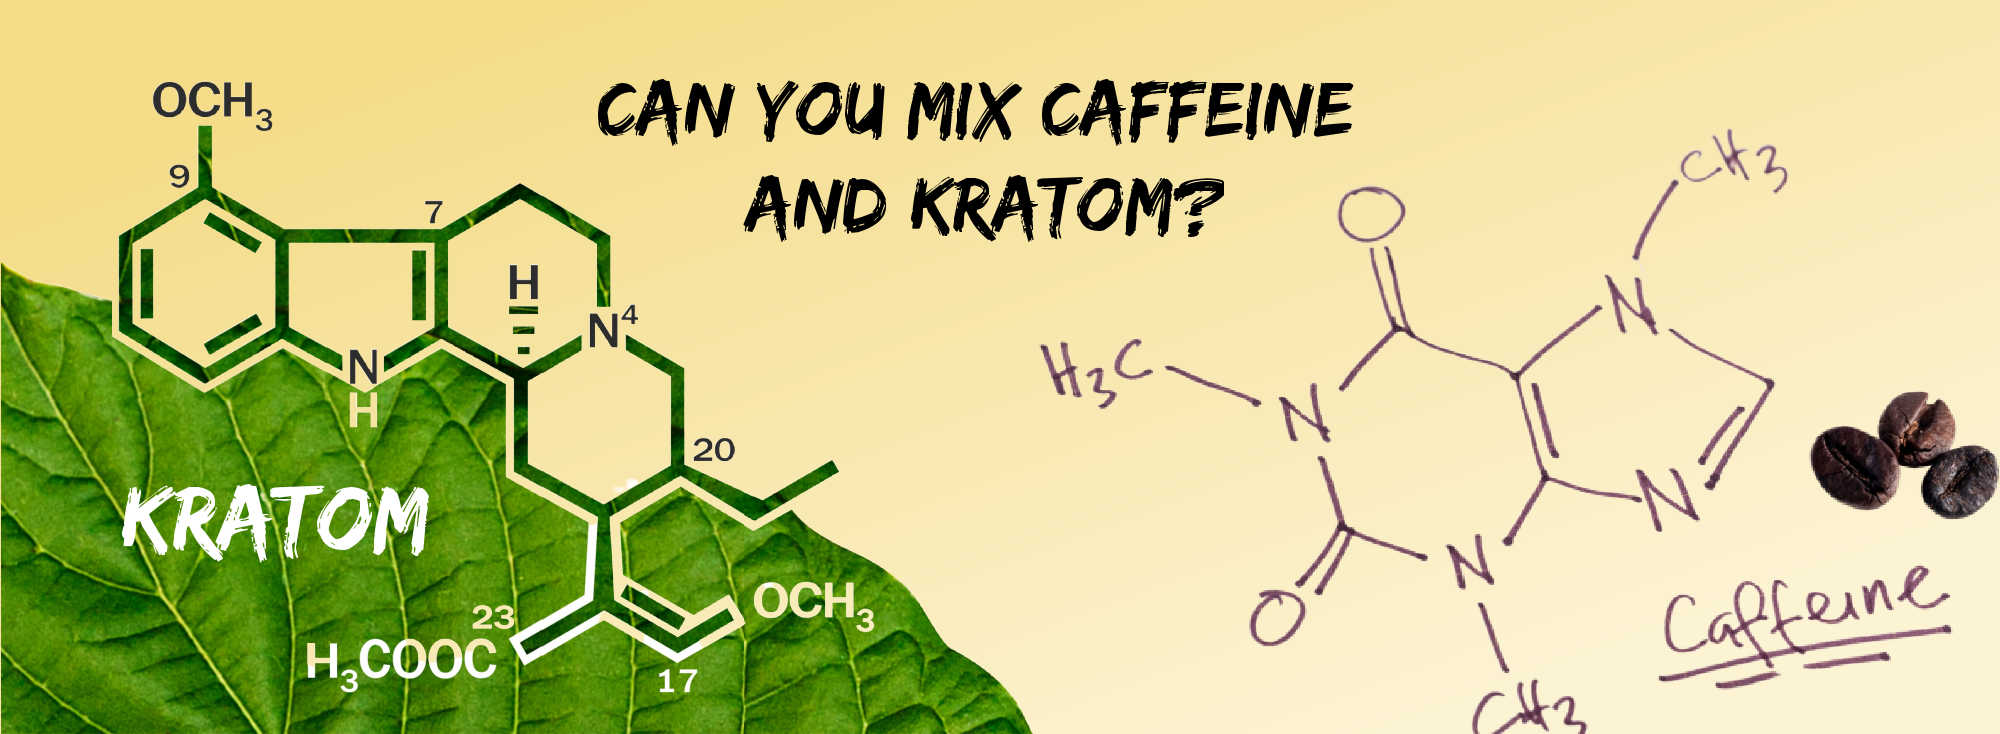 image of can you mix caffiene and kratom